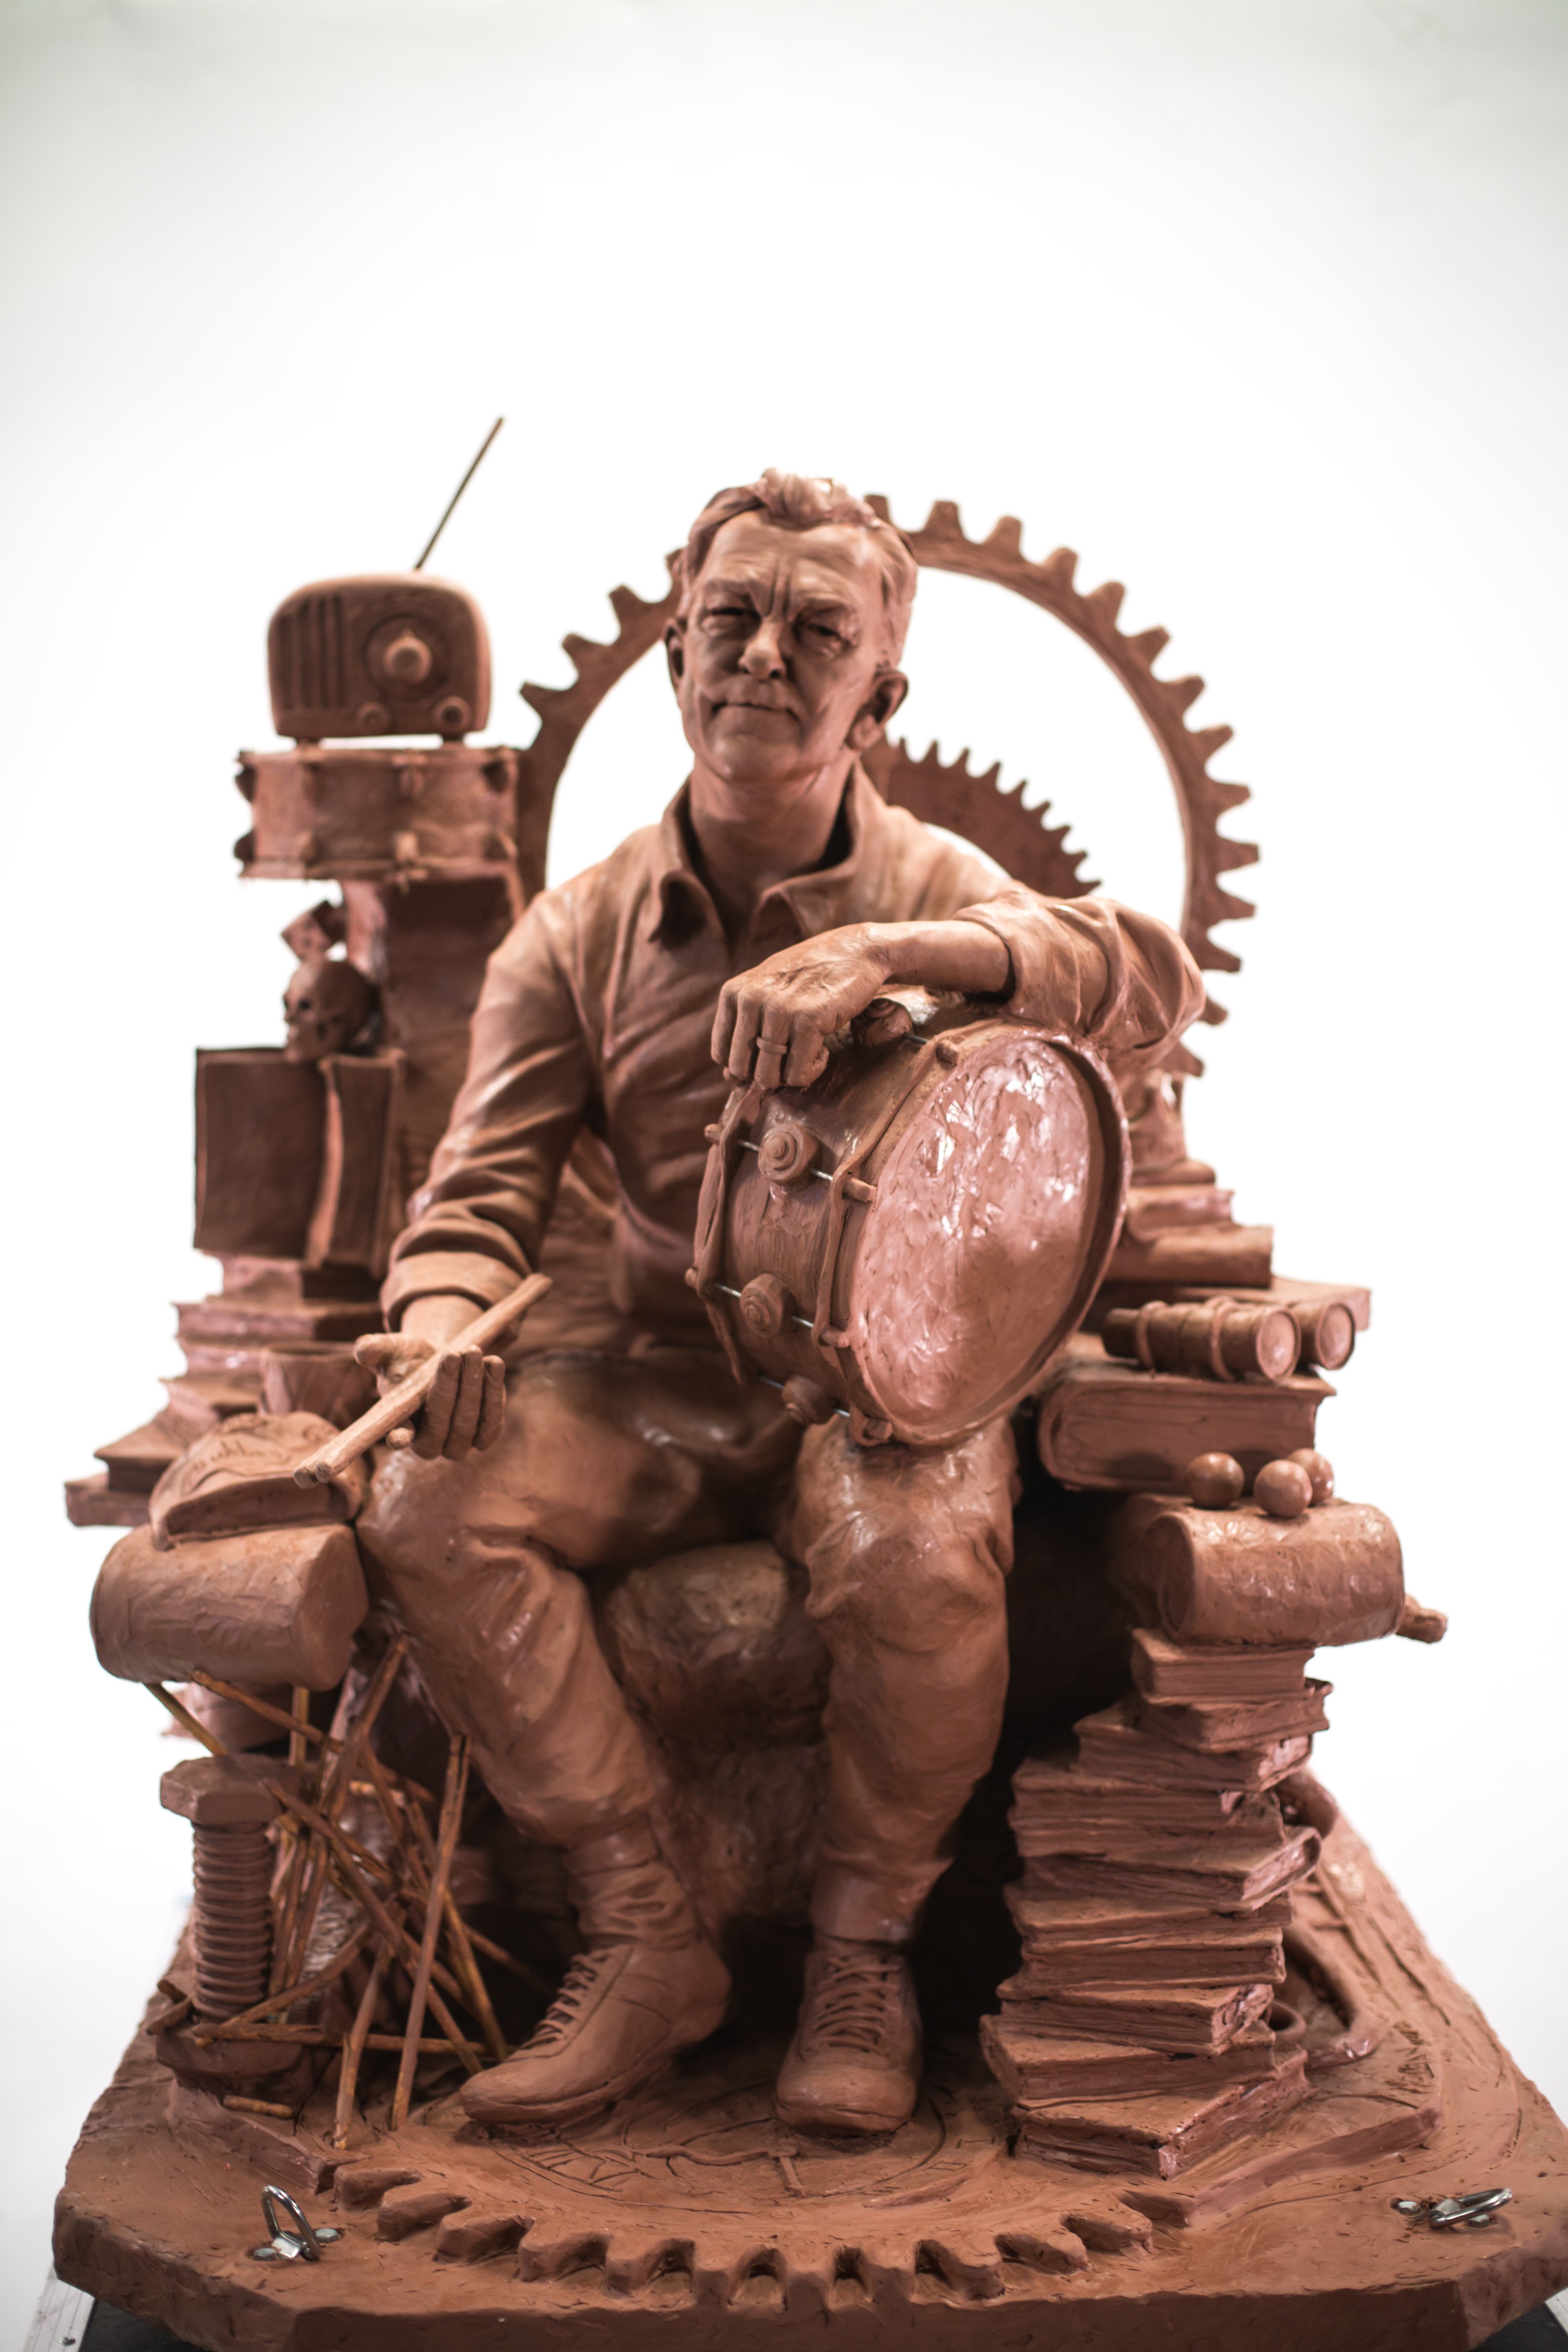 Artist rendition of Peart memorial sculpture featuring a younger Neil